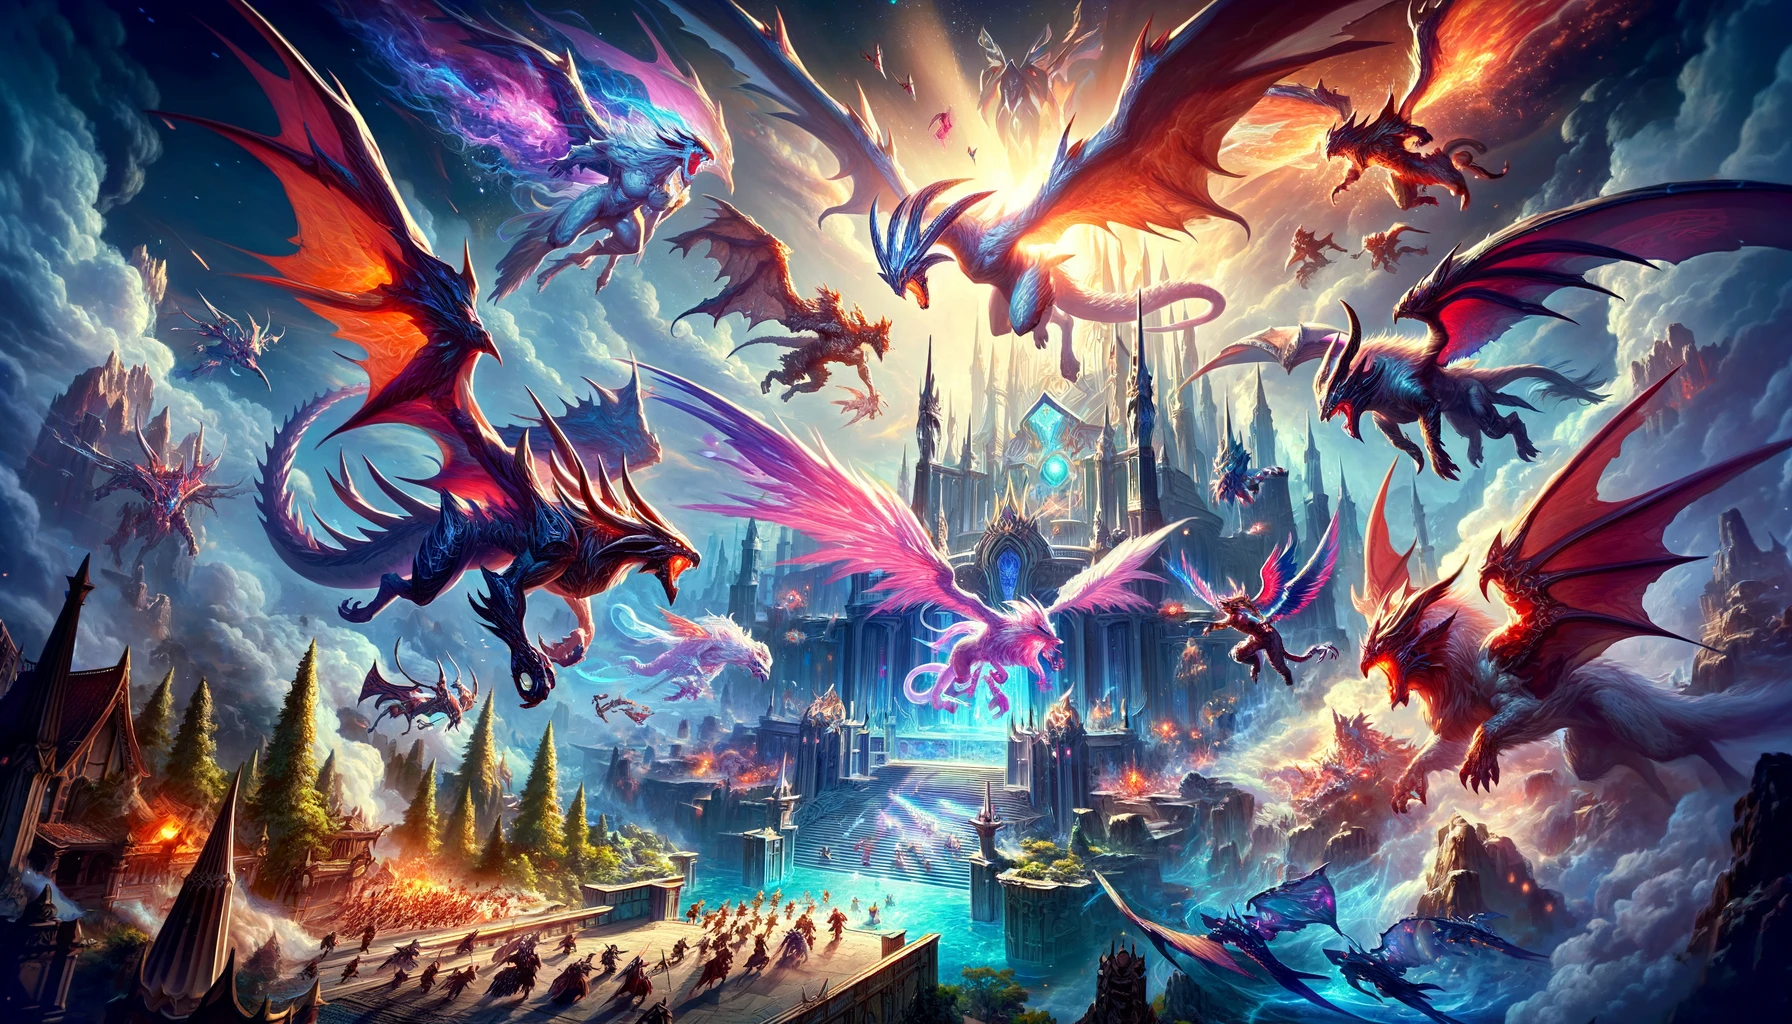 Vivid illustration of mythical creatures attacking a fantastical fortress, with dragons and winged beasts swooping down from the sky and defenders retreating under the forceful assault.